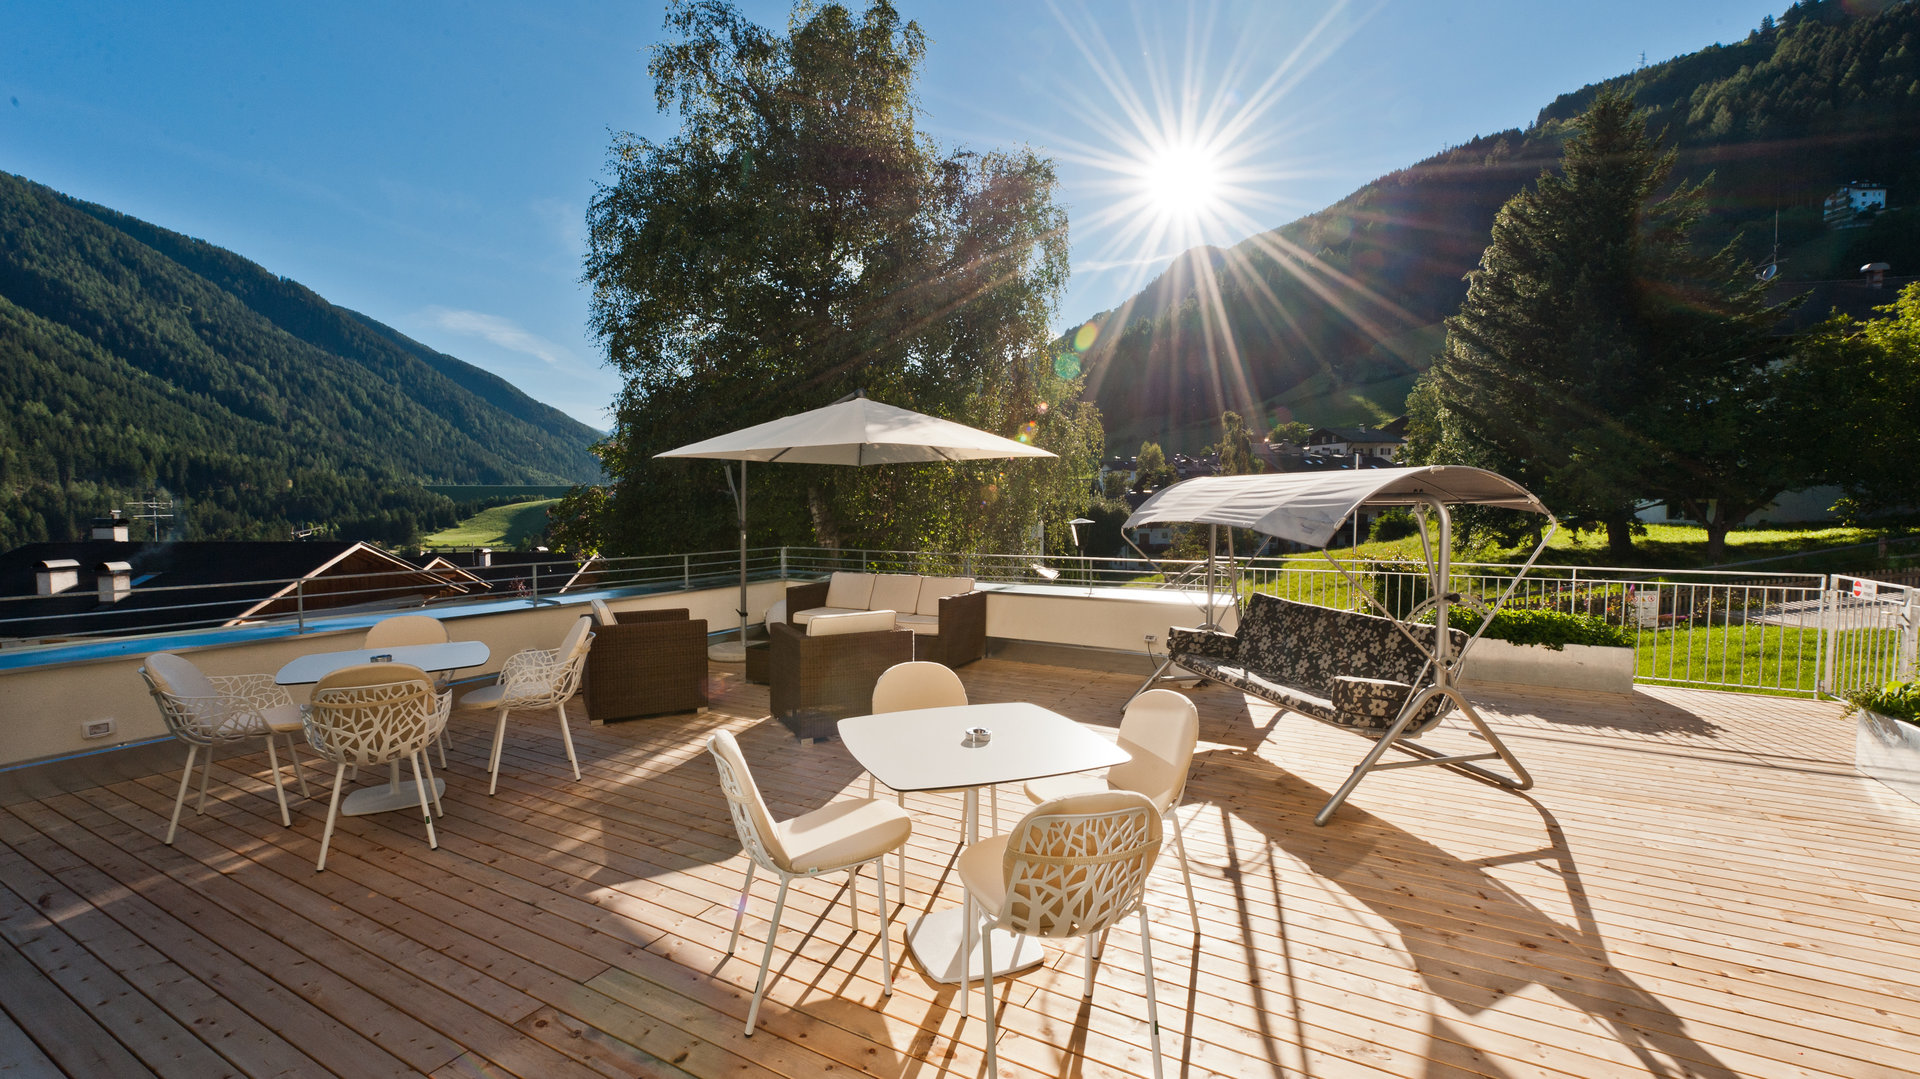 Central, quitly and sunny Hotel in Ultental Valley (South Tyrol) with sun terrace, garden, pool, wellness and a beautiful view on the mountains.